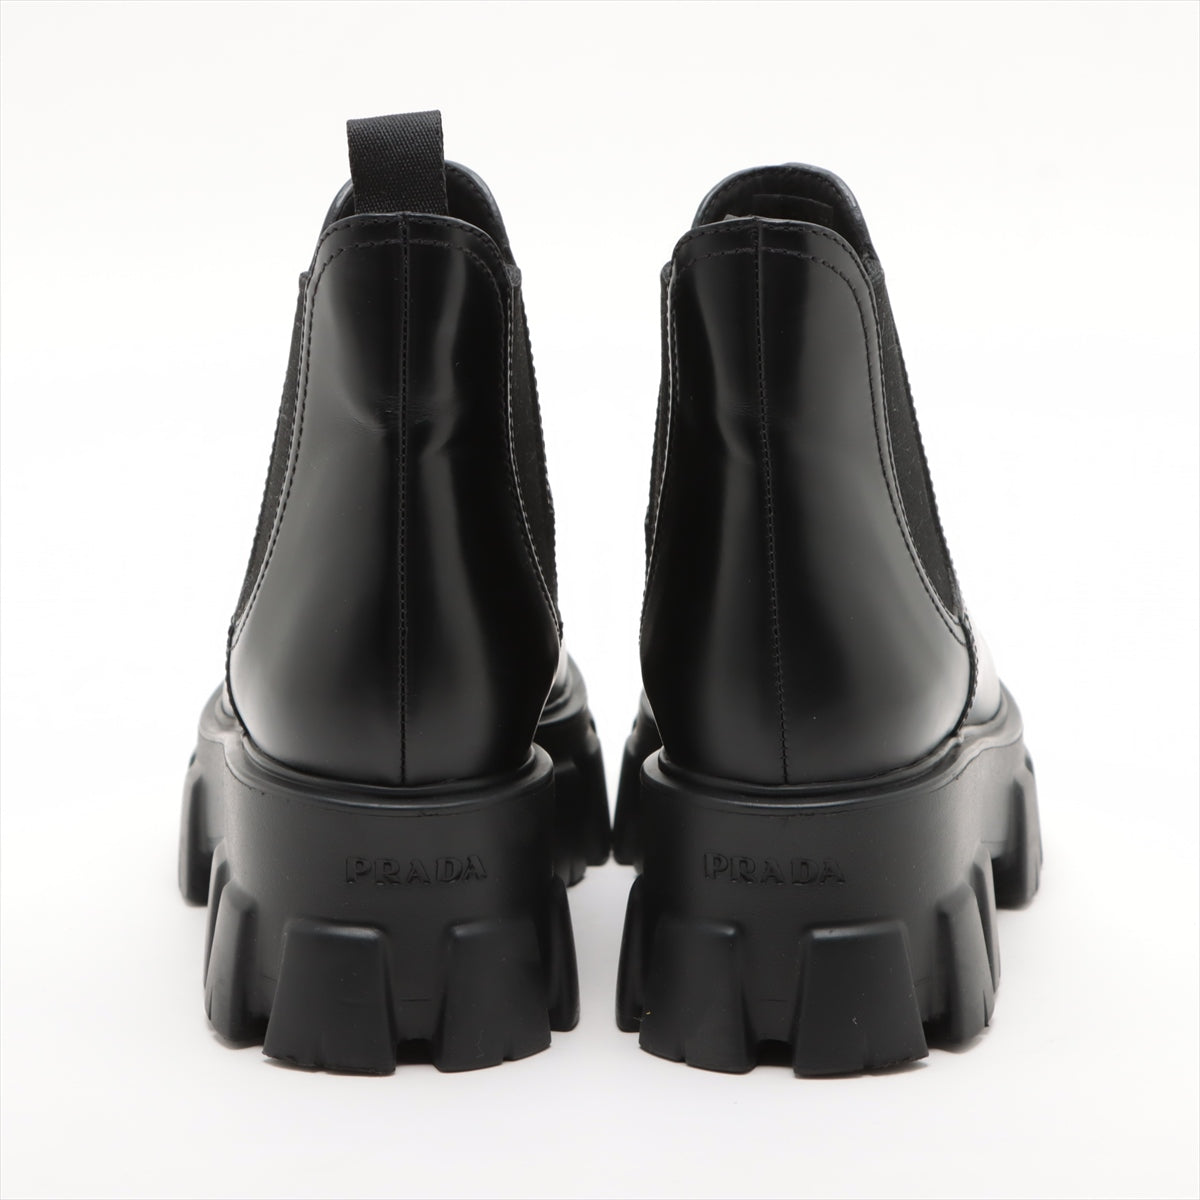 Prada Monolith brushed leather Side Gore Boots 36 Ladies' Black 725 chelsea boots There is a storage bag